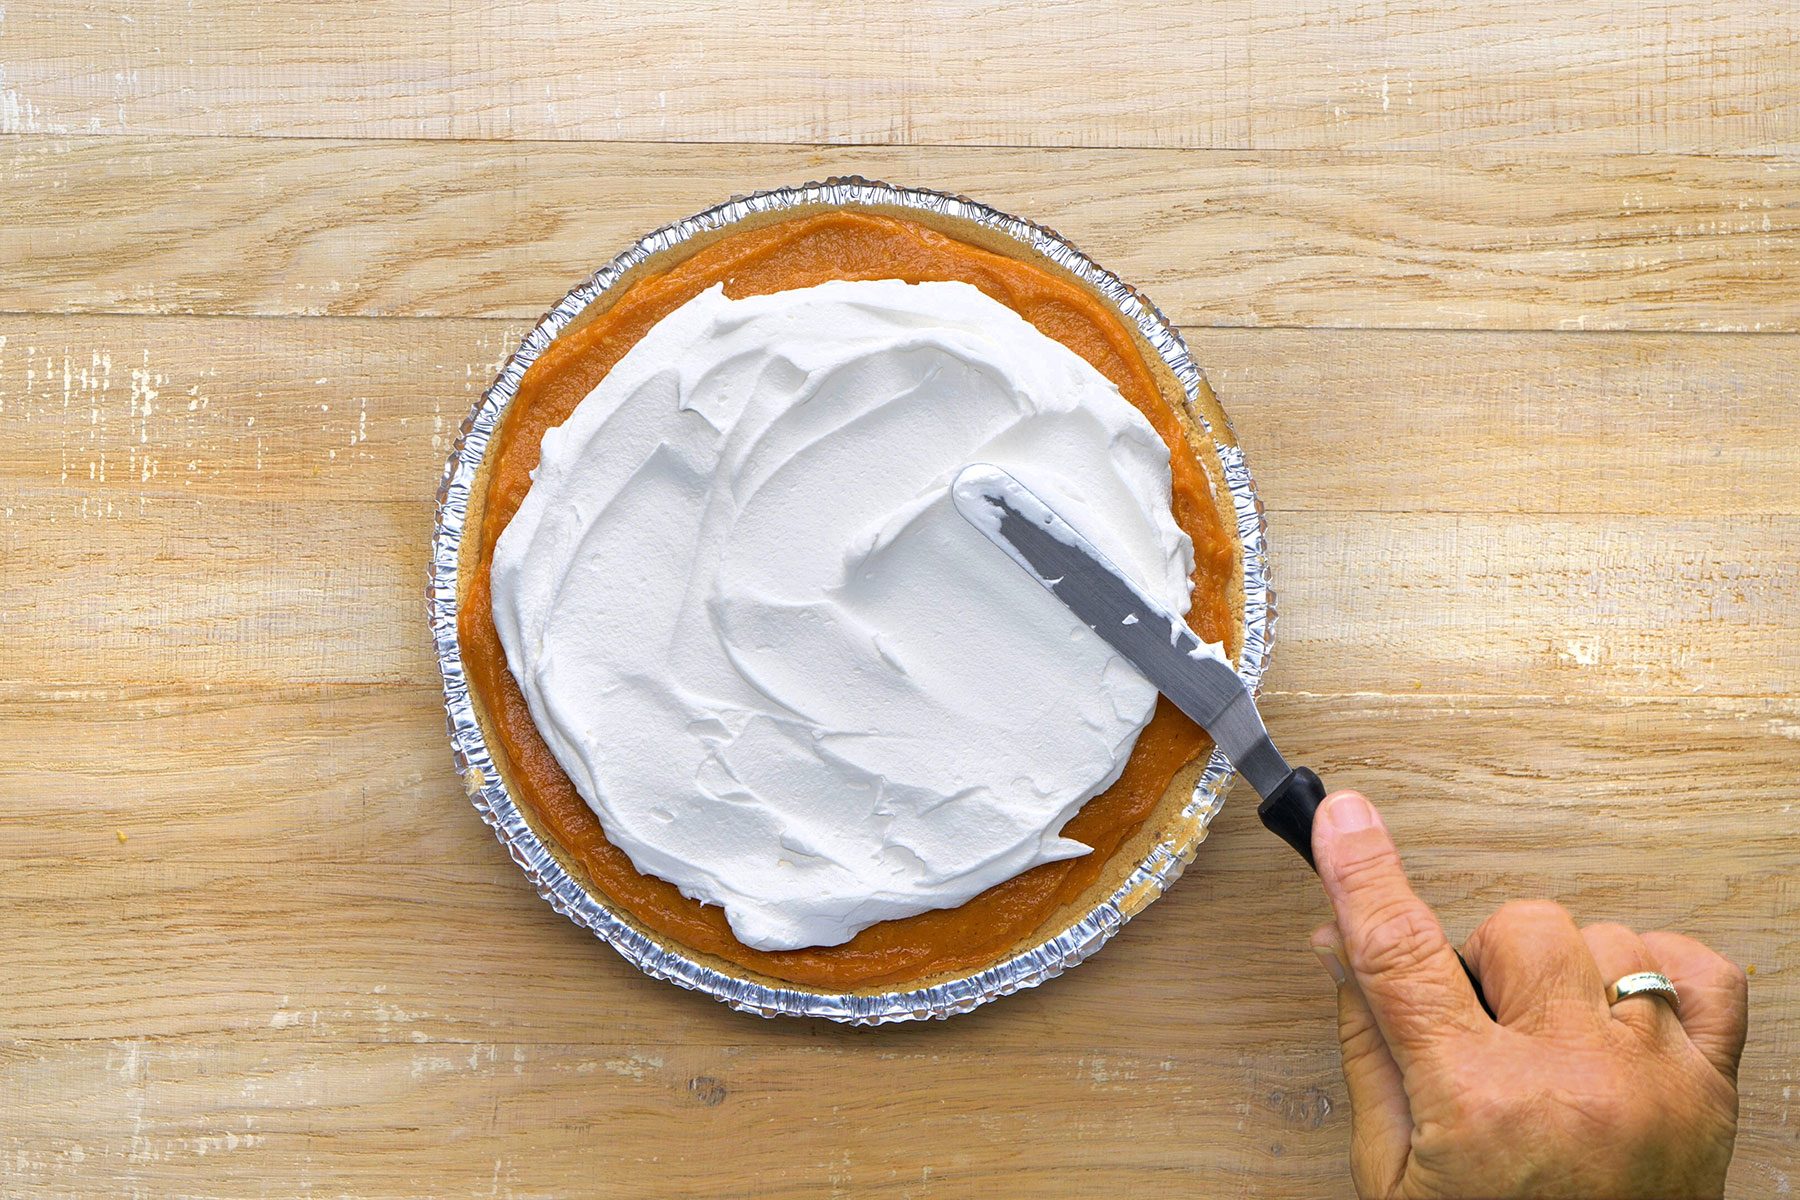 Layering the pie with whipped cream